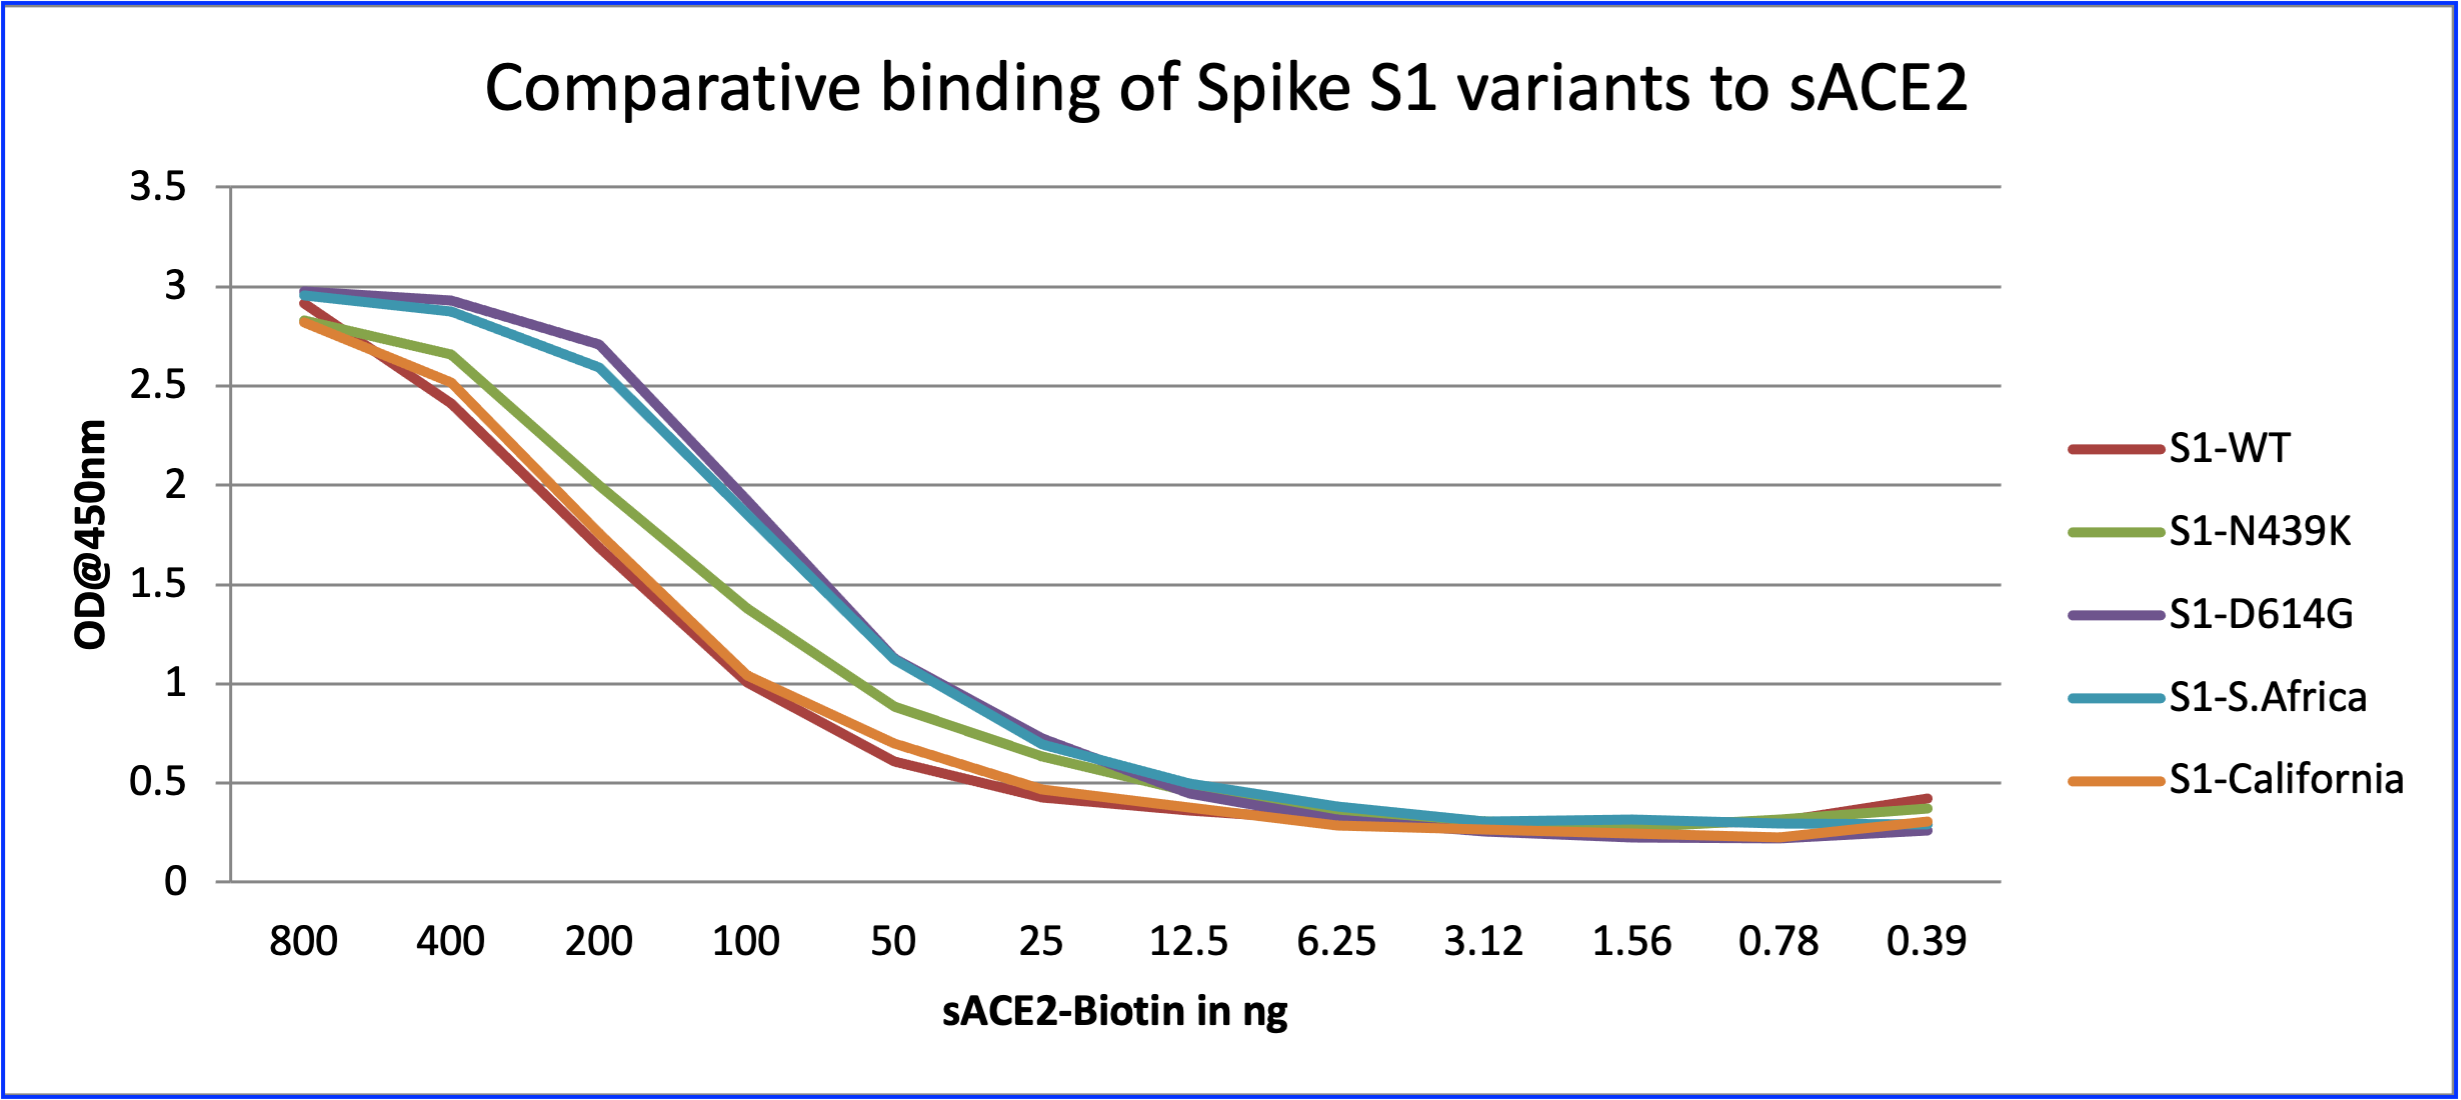 Figure-3:Comparative binding of Spike S1 variants to sACE2: Wells of a 96-well microtiter plate were coated with 100 ng in duplicates each of S1-WT (Cat# 21-1008), S1-N439K (Cat# 21-1012), S1-D614G (Cat# 21-1009), S1-South Africa (Cat# 21-1017), and S1-Southern California (Cat# 21-1018). Binding to sACE2 was determined by adding different concentrations of biotinylated-sACE2 (Cat# 21-1006).